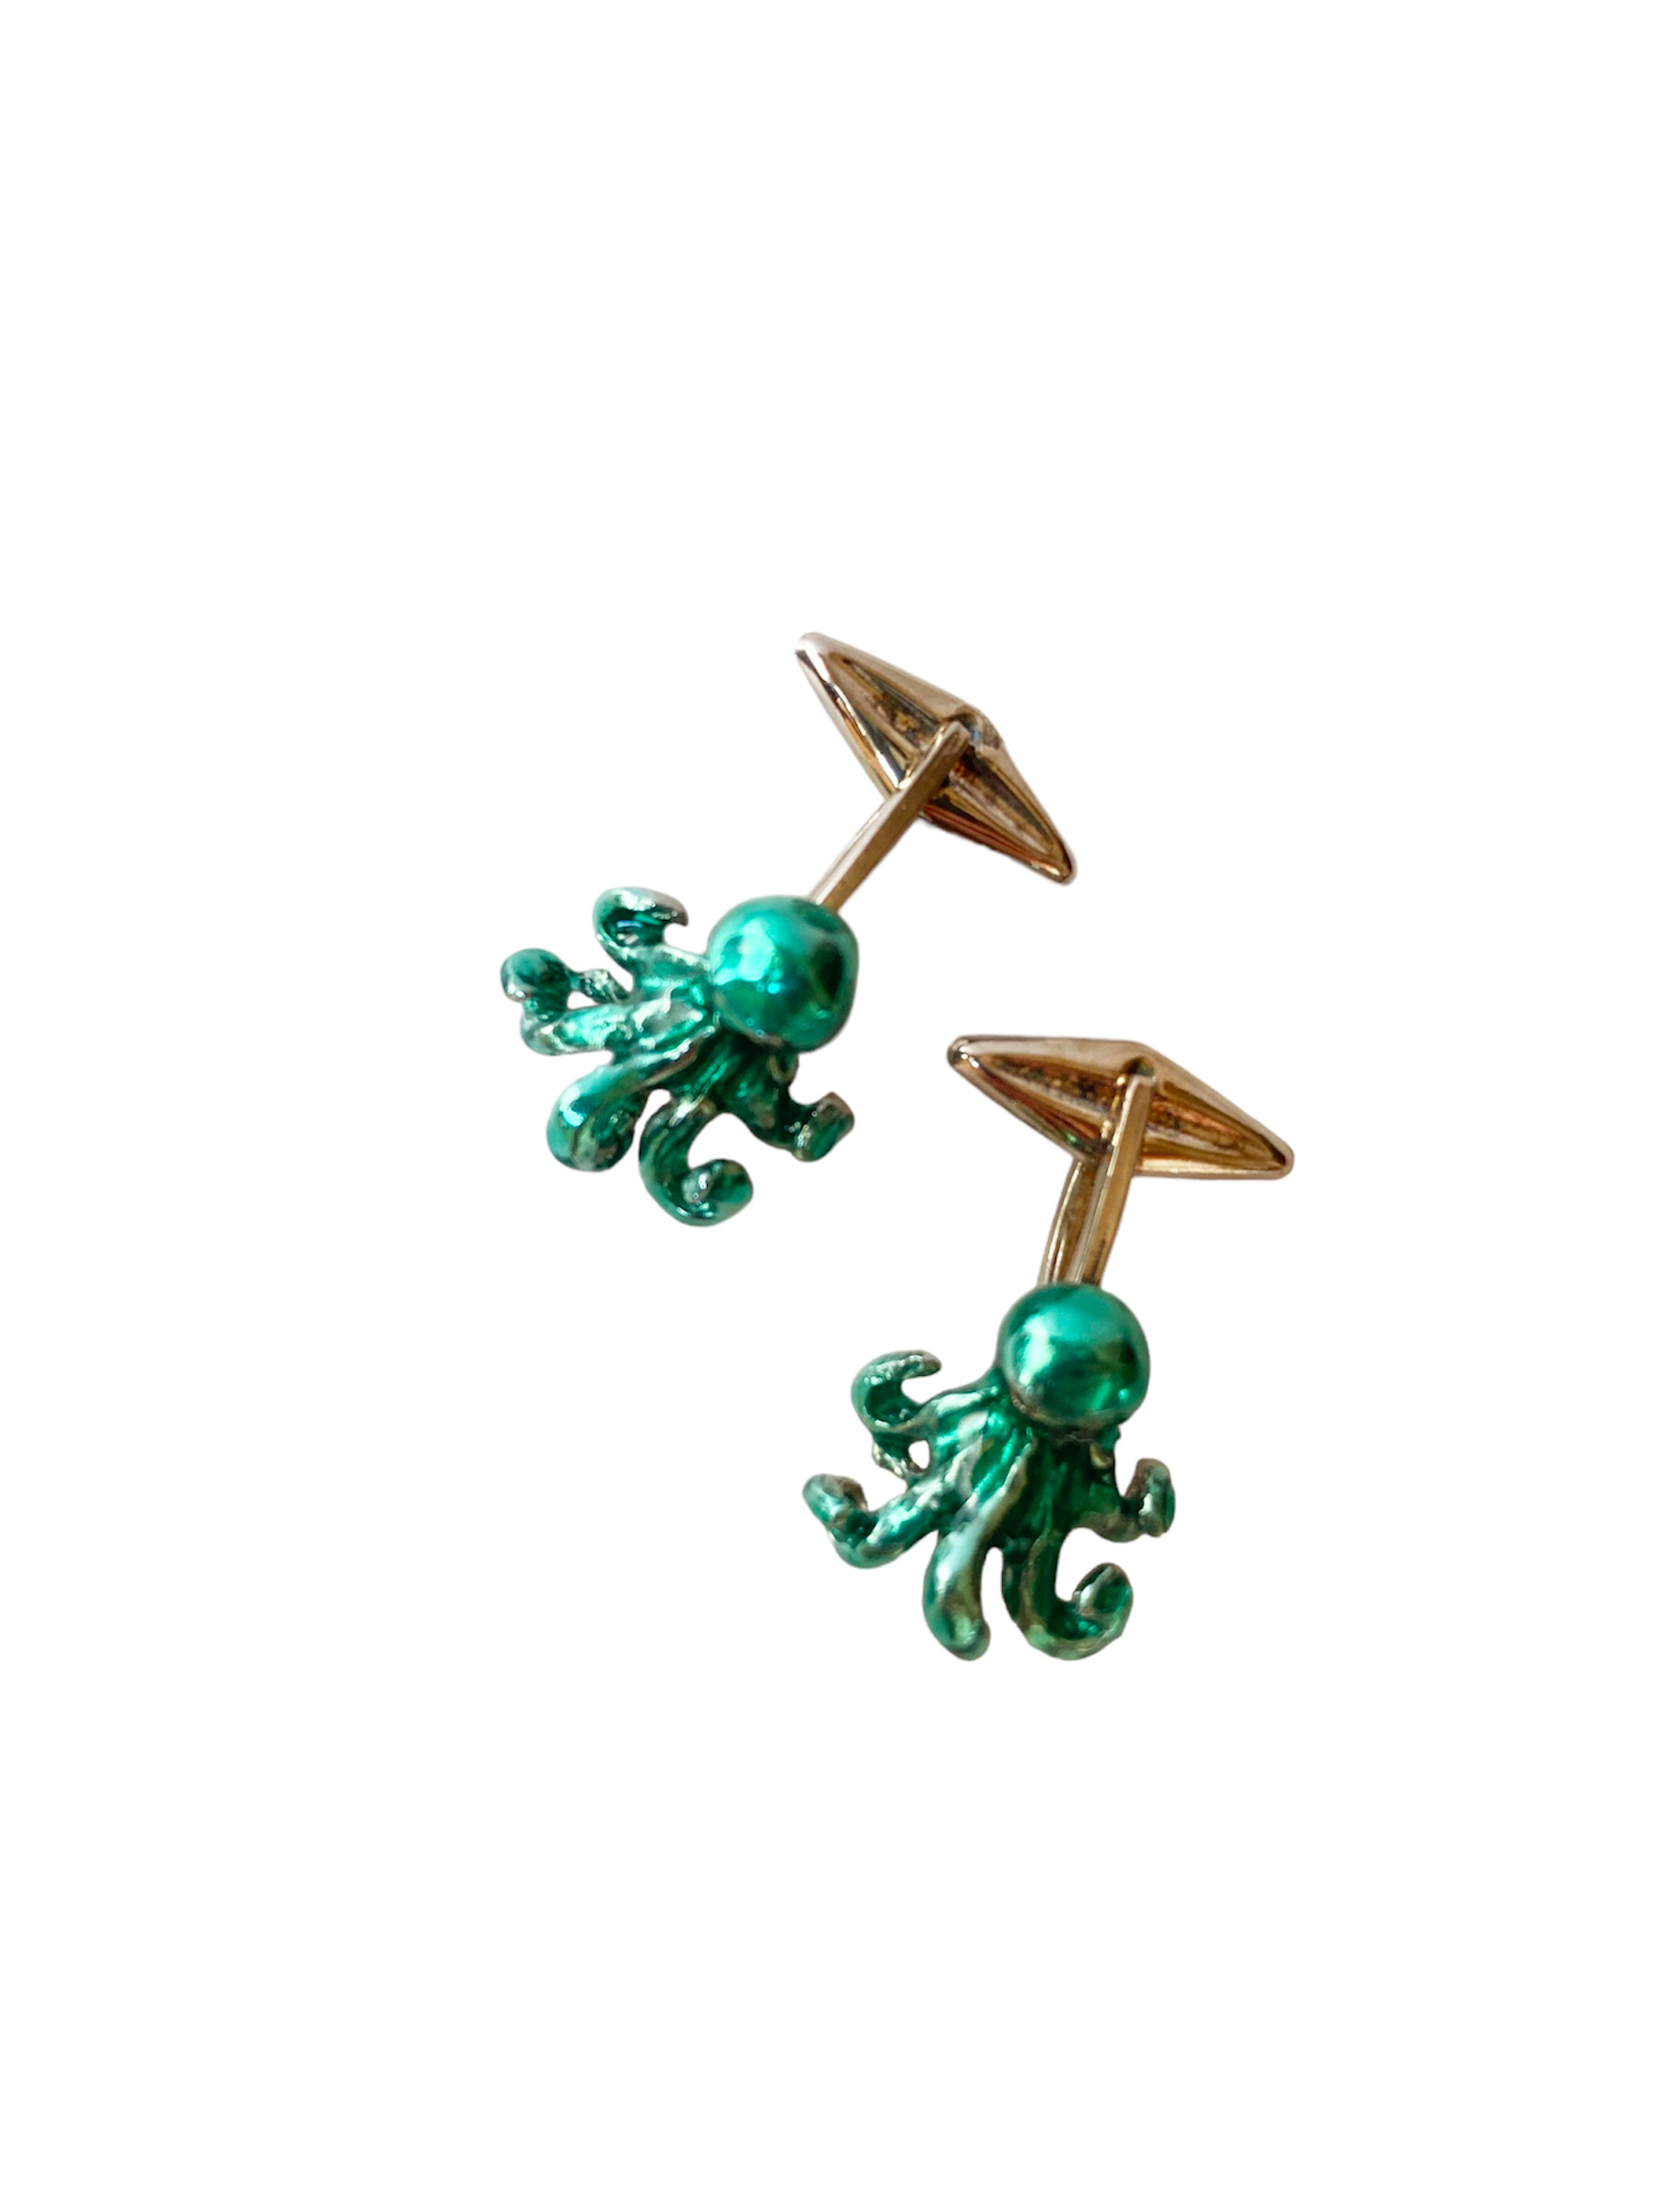 Elevate your style with the Rossella Ugolini Octopus Cufflinks, meticulously handcrafted in Italy. These cufflinks are a union of art and symbolism, a testament to craftsmanship.
Unlike mass-produced alternatives, each cufflink is a unique